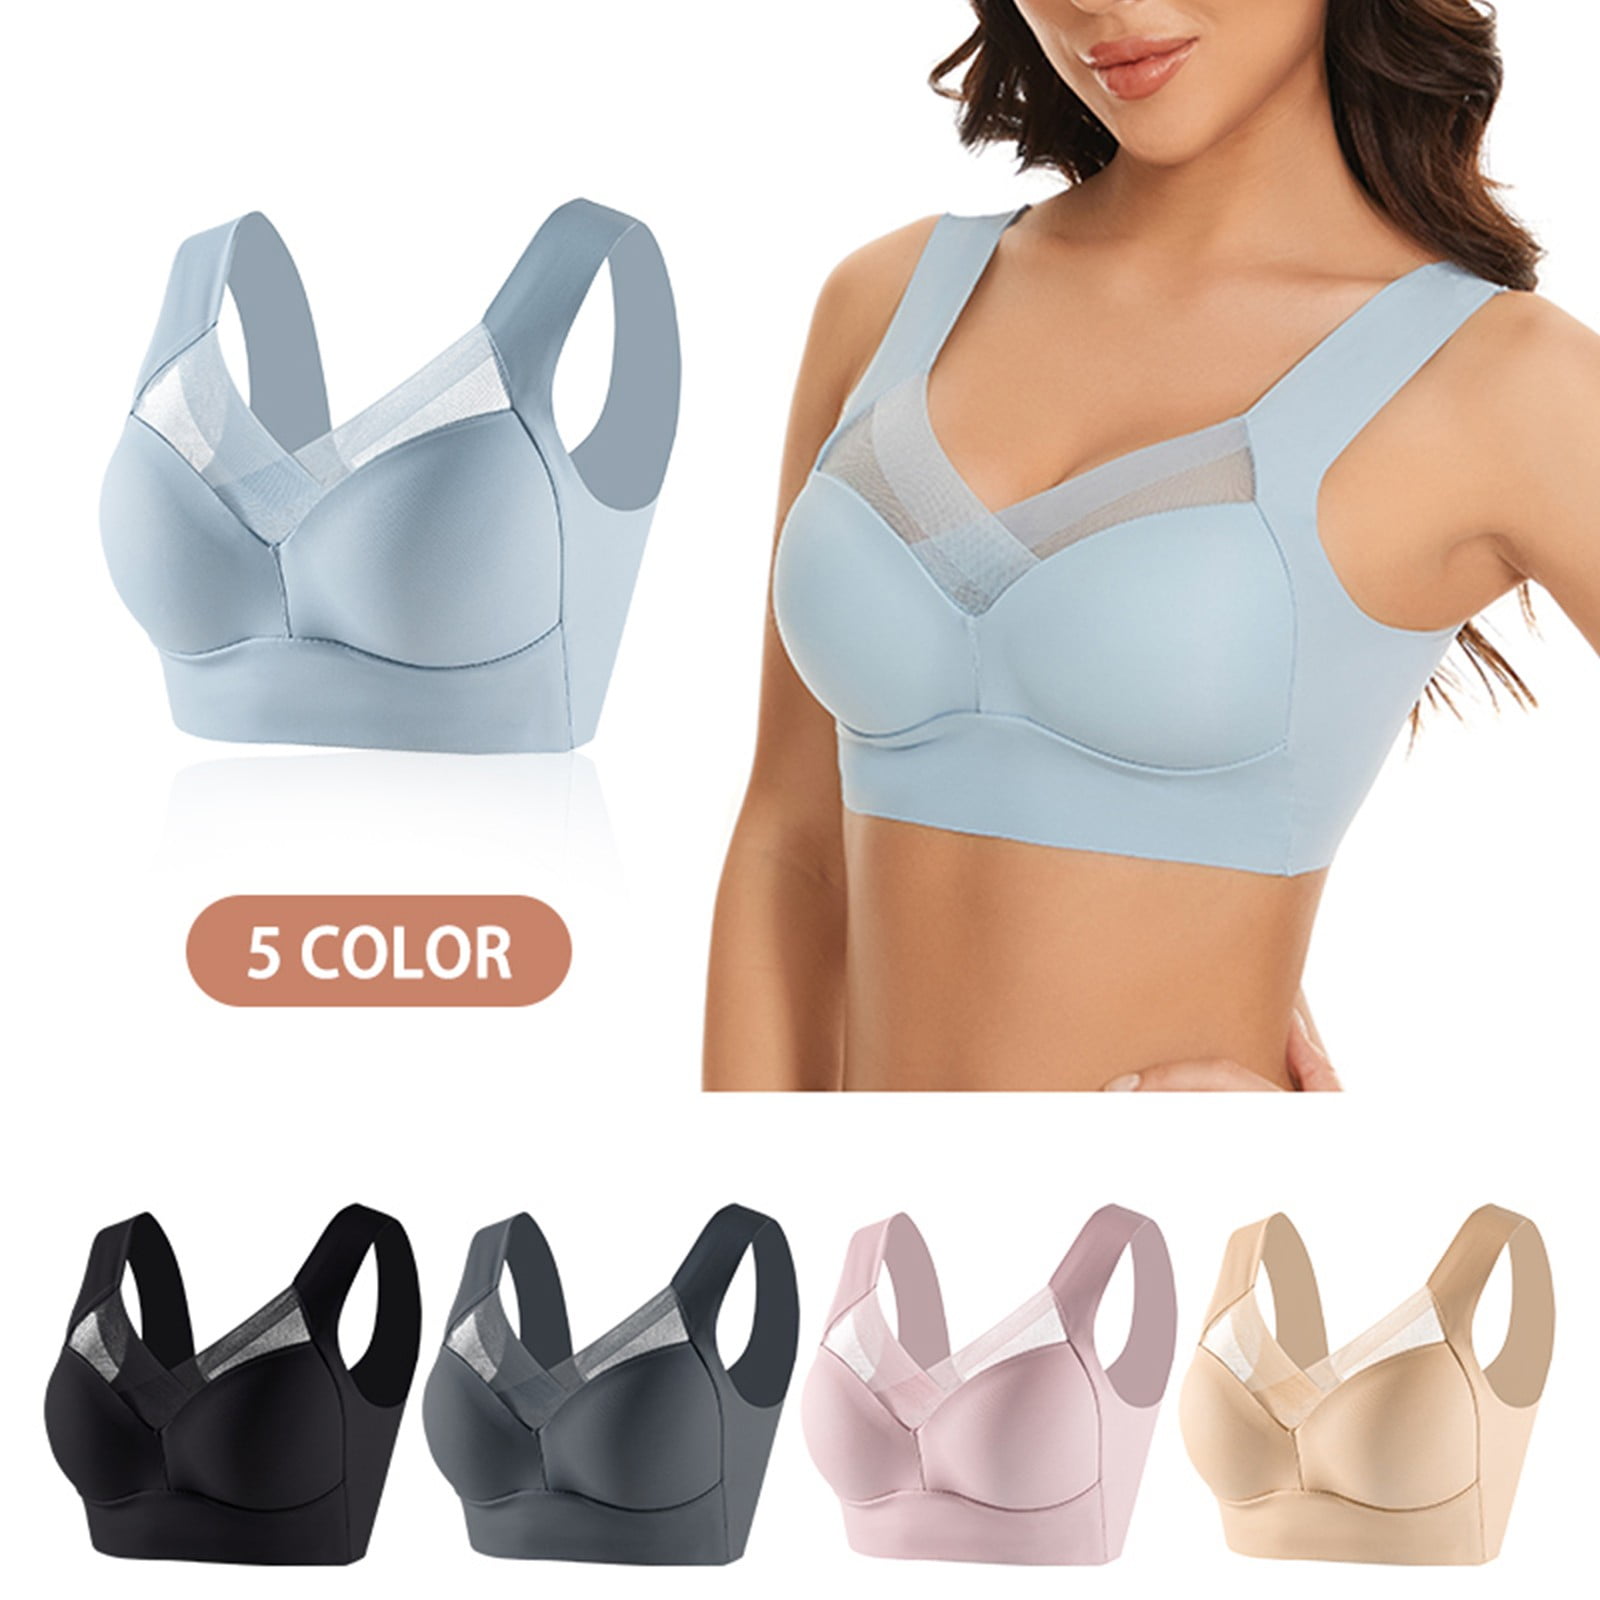 TQWQT Lady Bra Push Up Seamless Thin Wire Free No Constraint Women  Brassieres Daily Wear Clothes,Light Blue XXL 